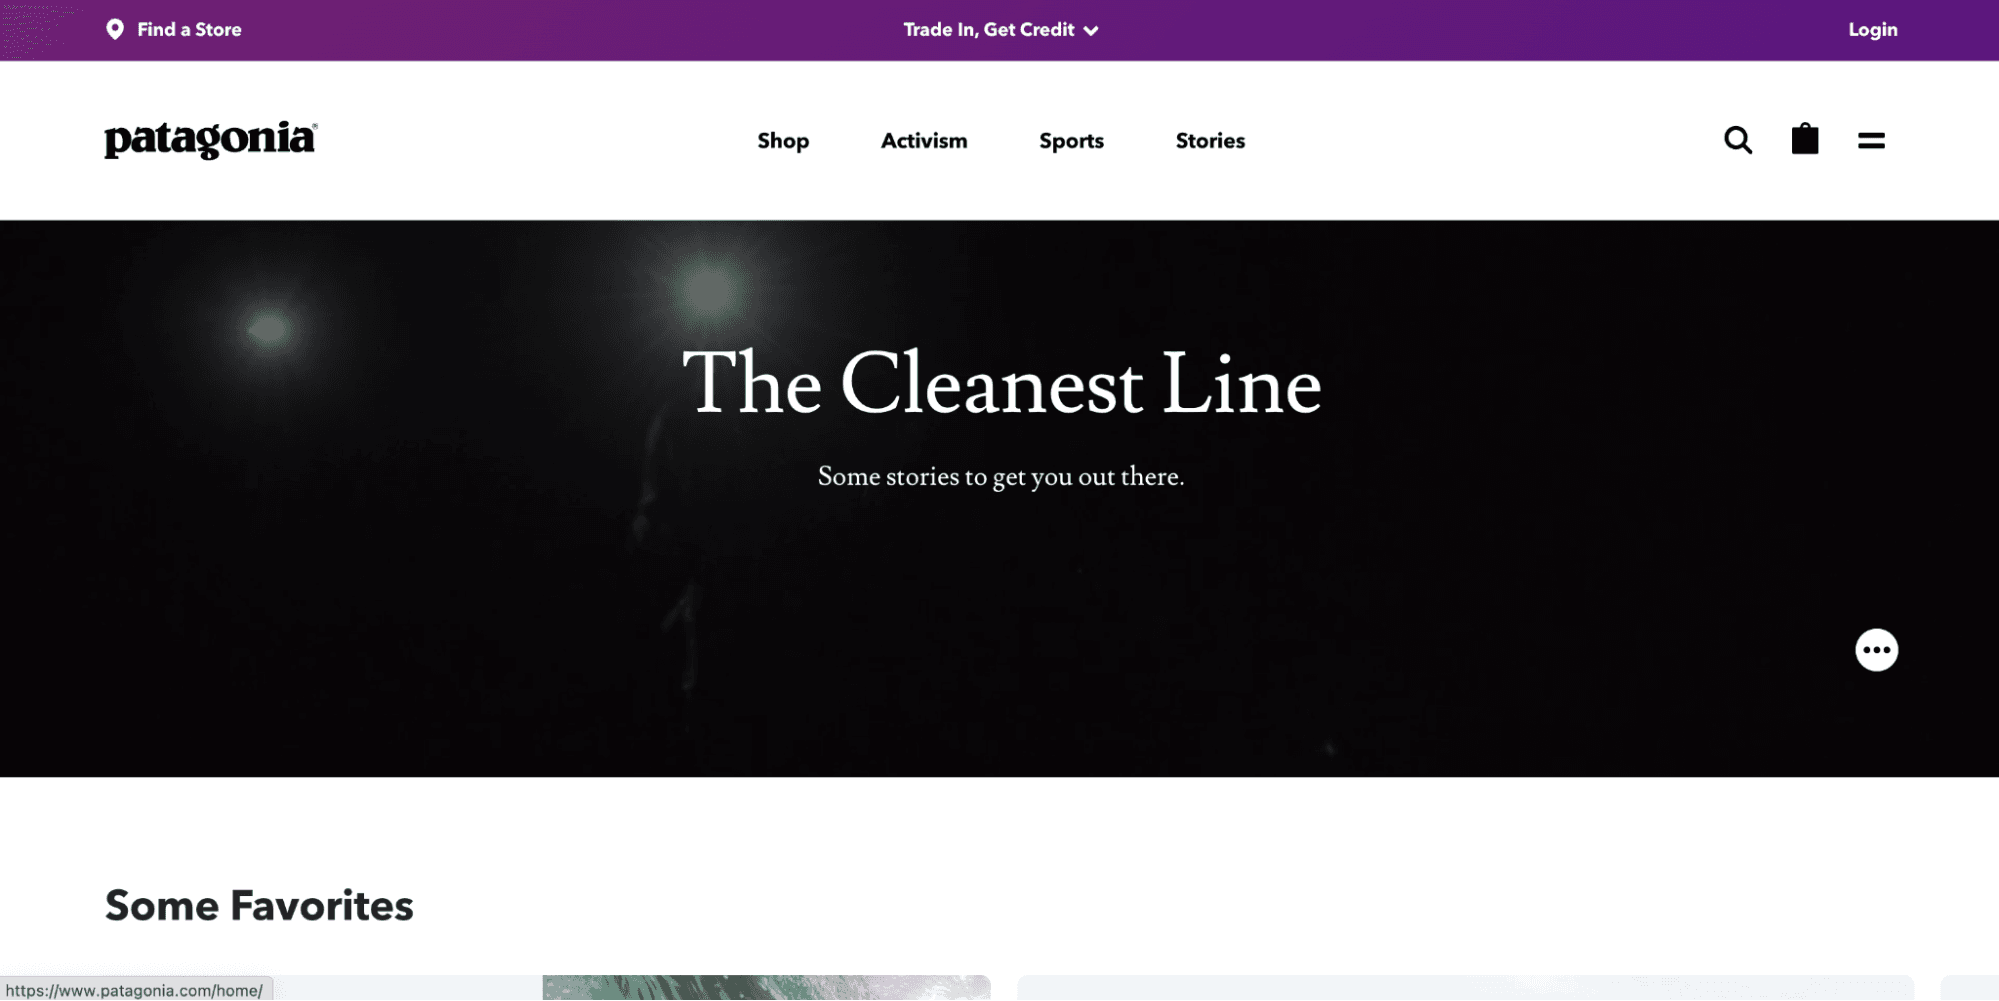 Patagonia blog titled "The Cleanest Line"